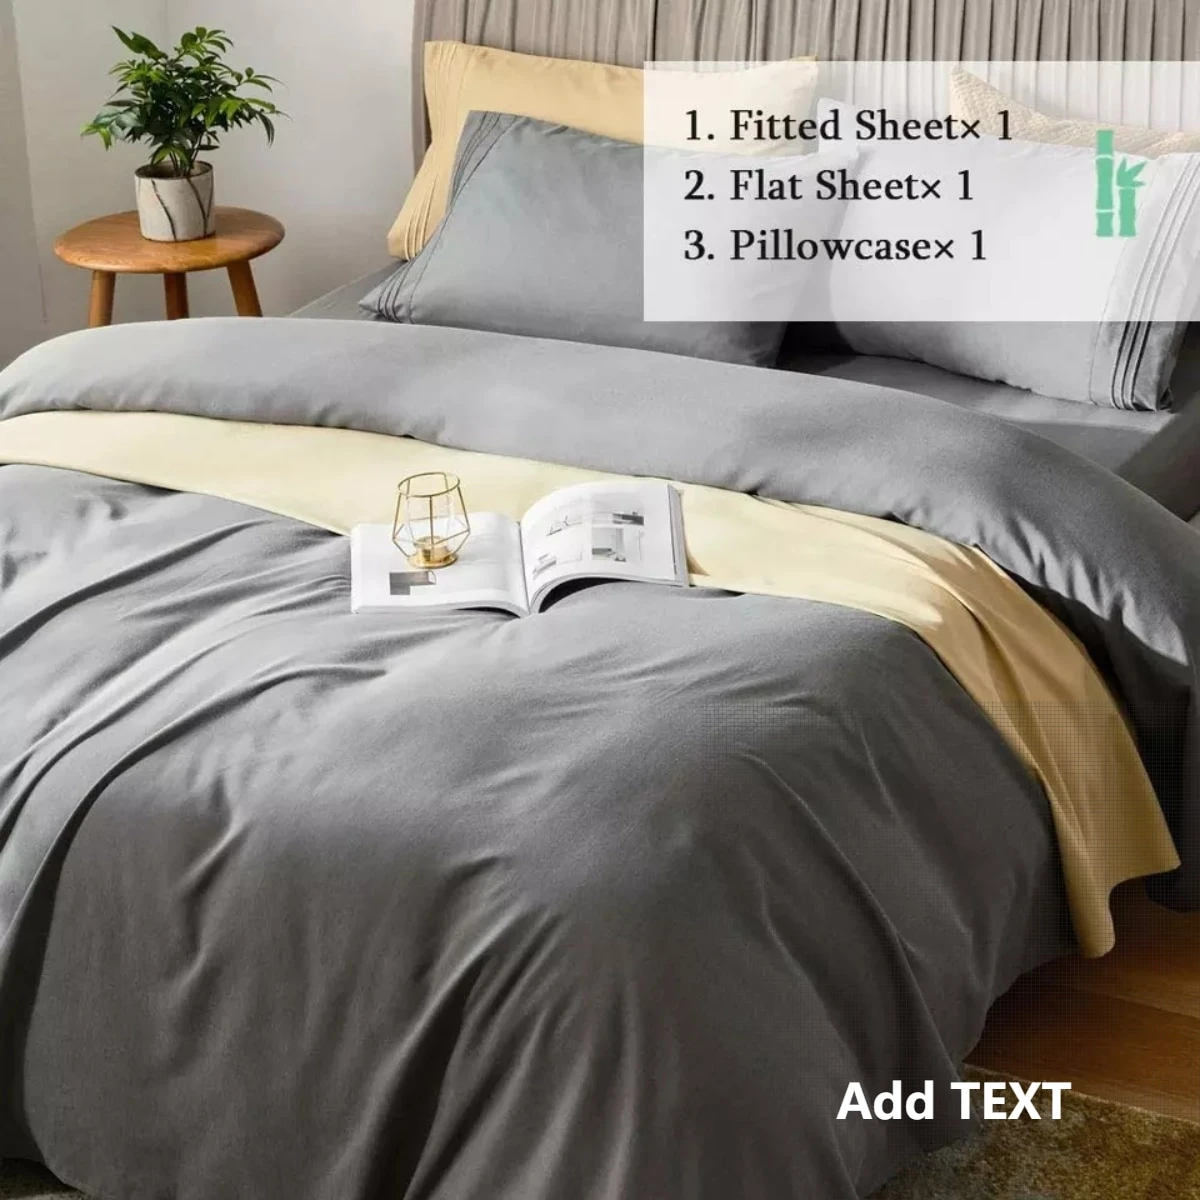 King Size Bedding Sheet Set 4 Piece Hotel Luxury Bed Sheets Extra Soft Deep Pockets Easy Fit Grey Color